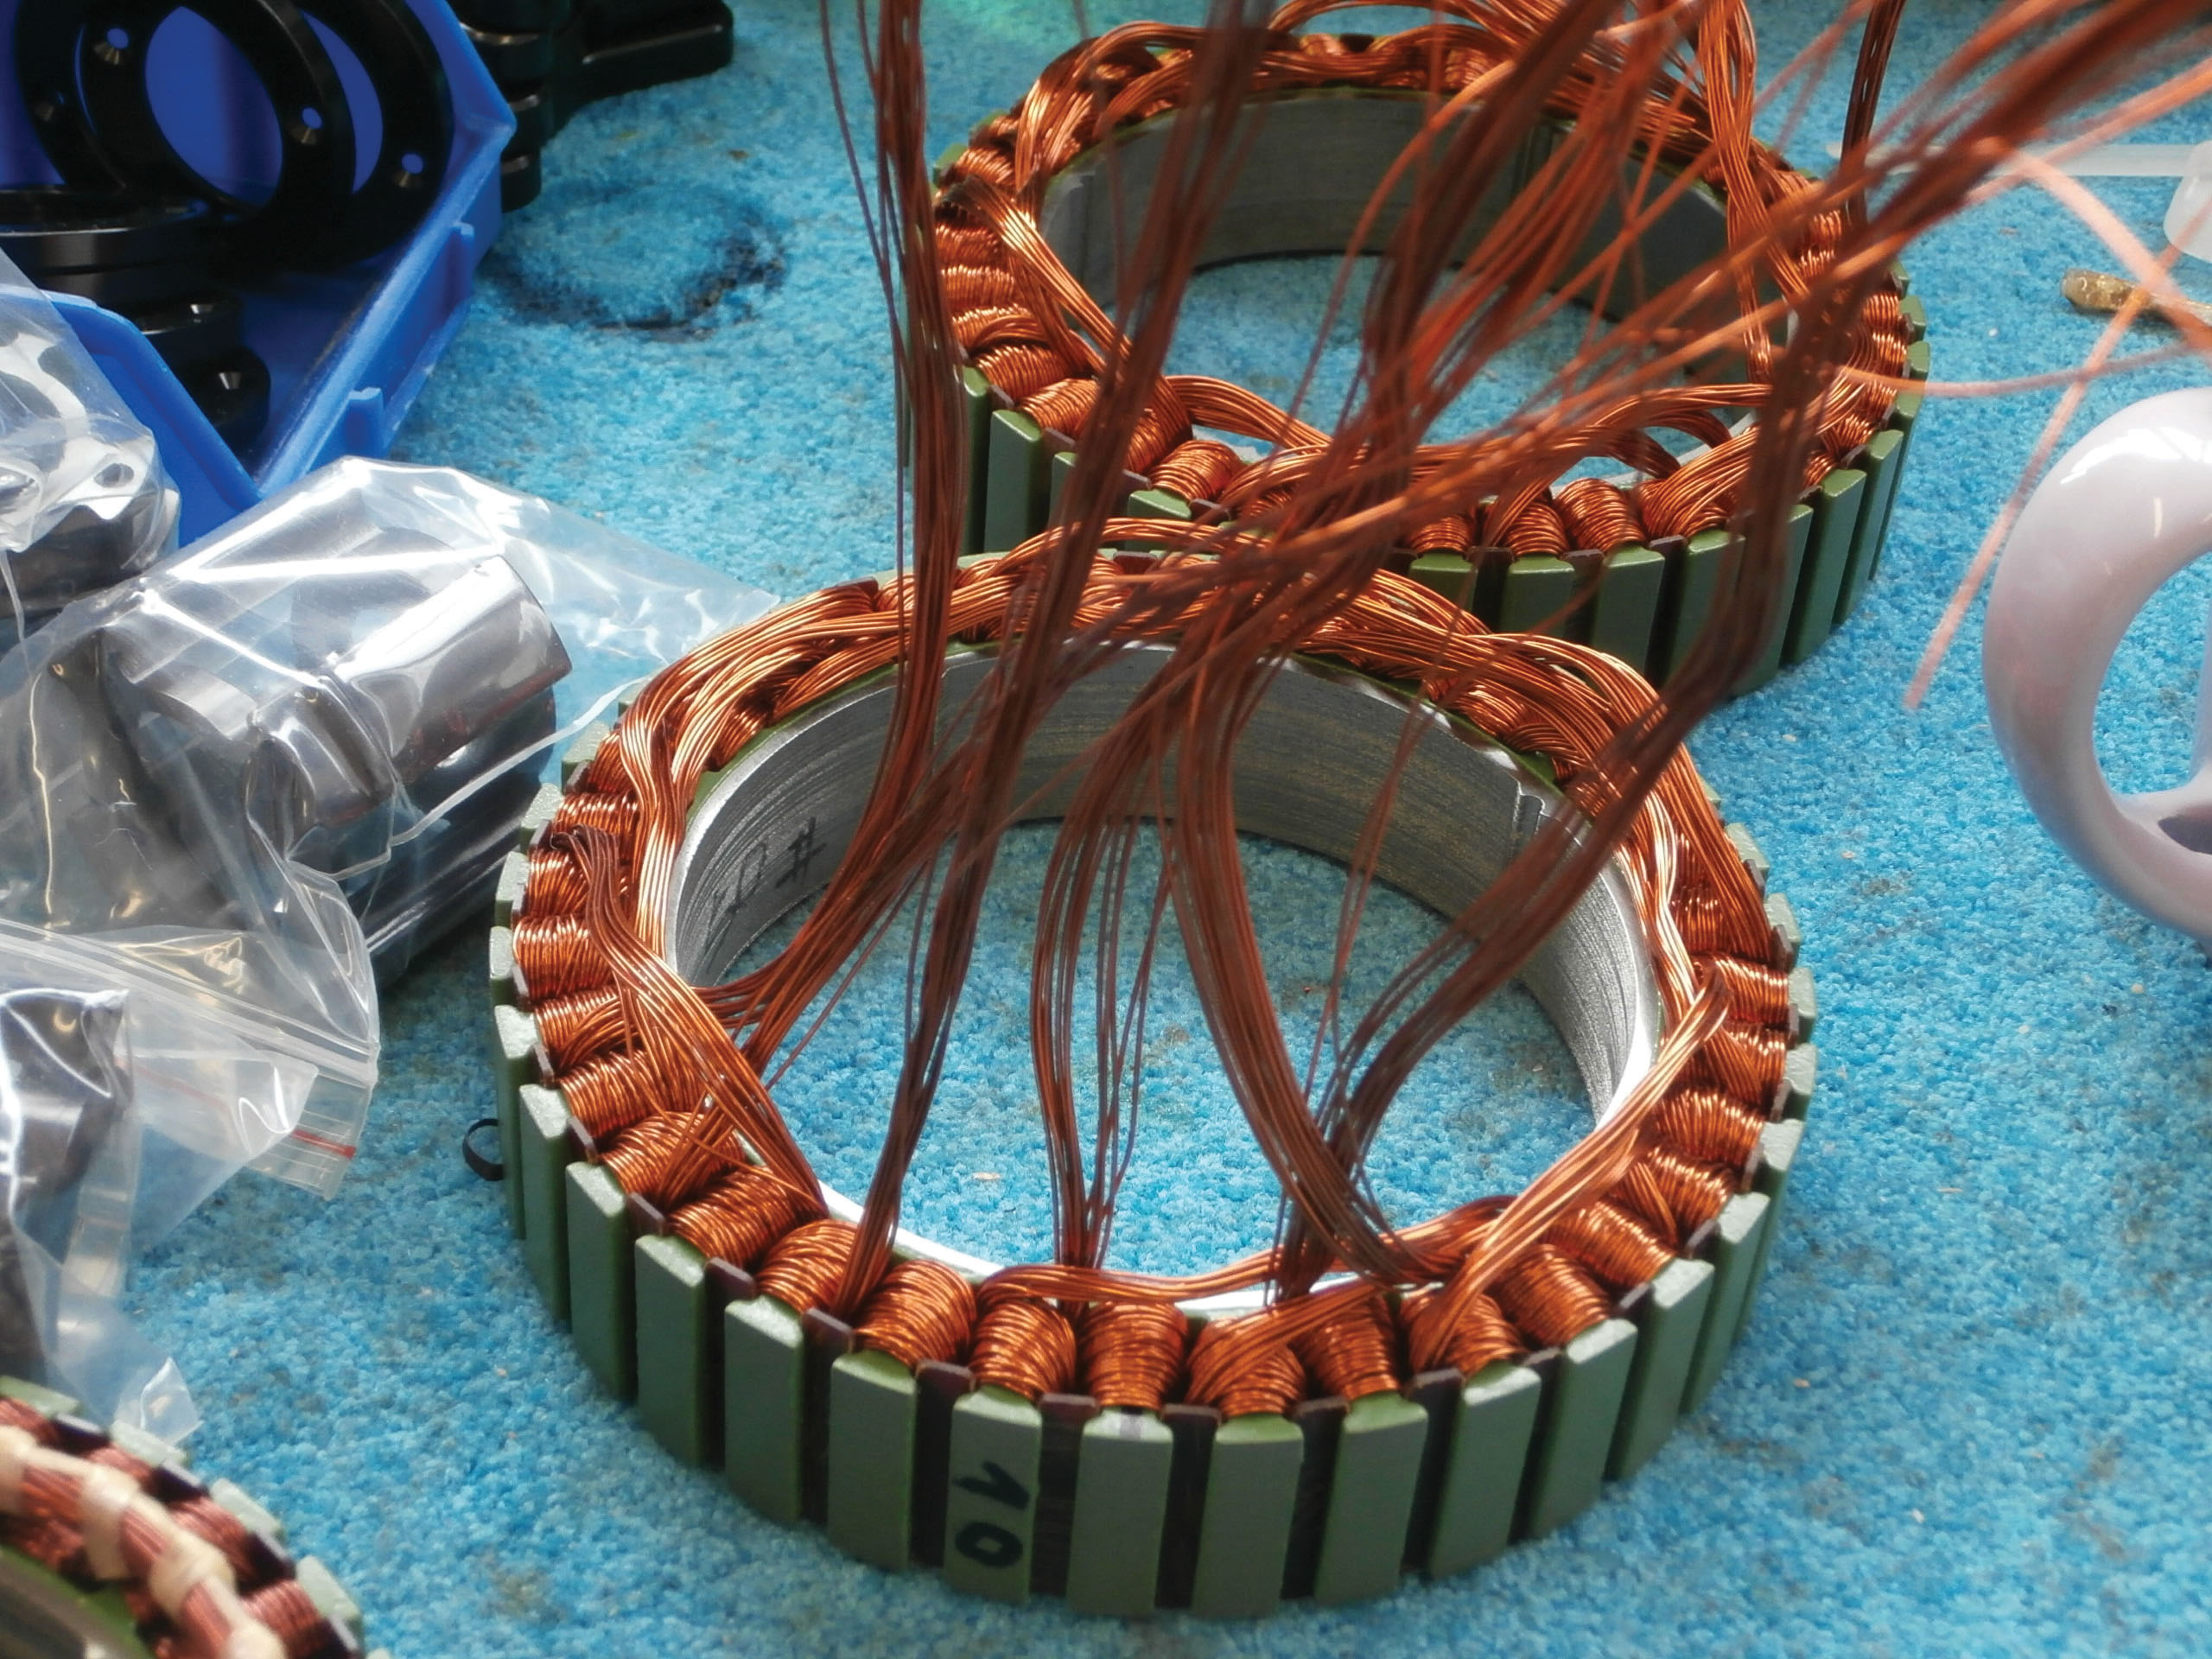 copper wires are wound around the stator to produce magnetic flux